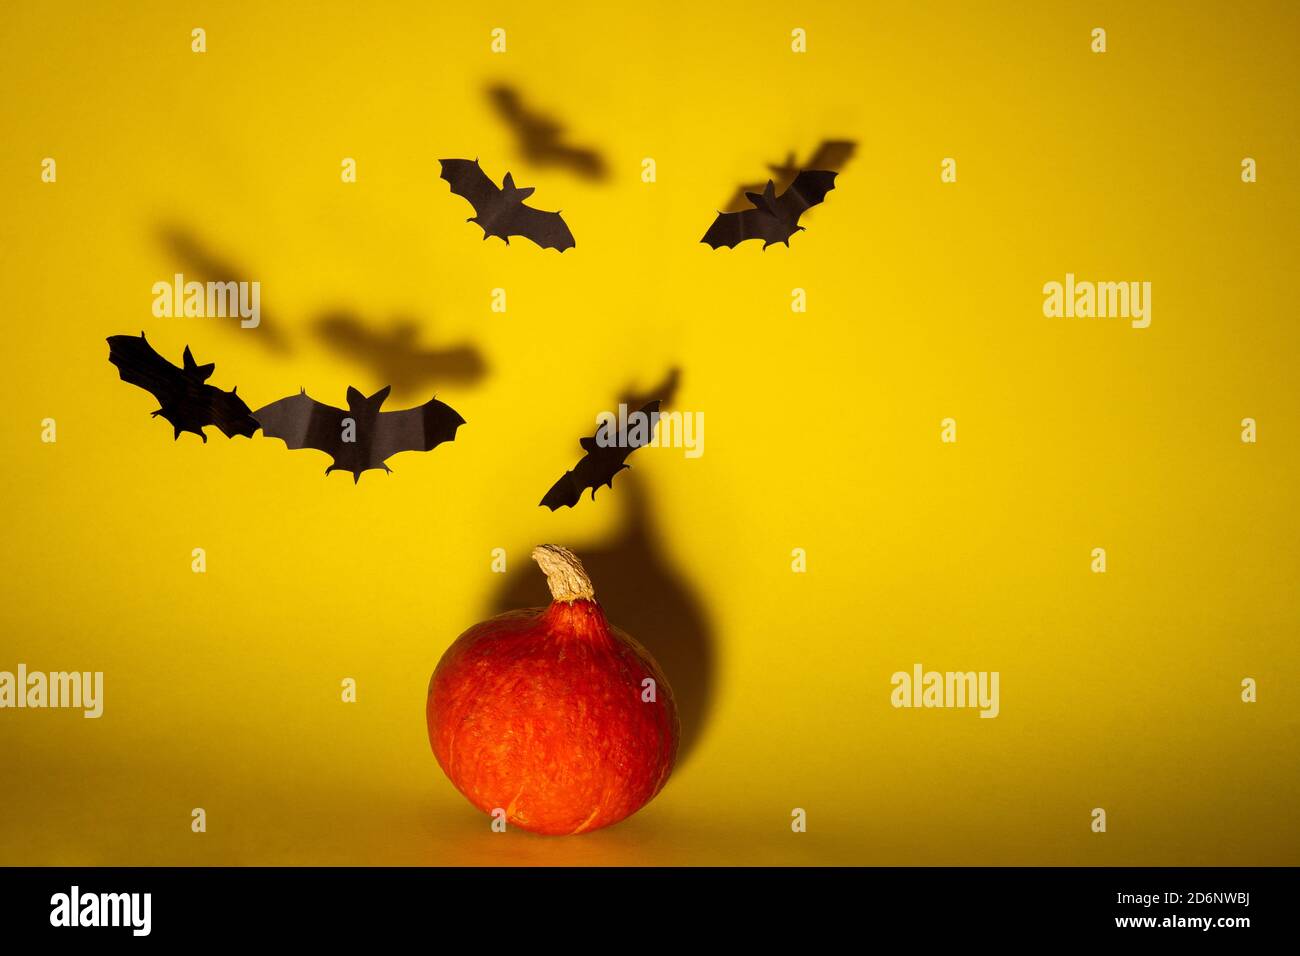 Halloween pumpkin with flying bats made of paper Stock Photo